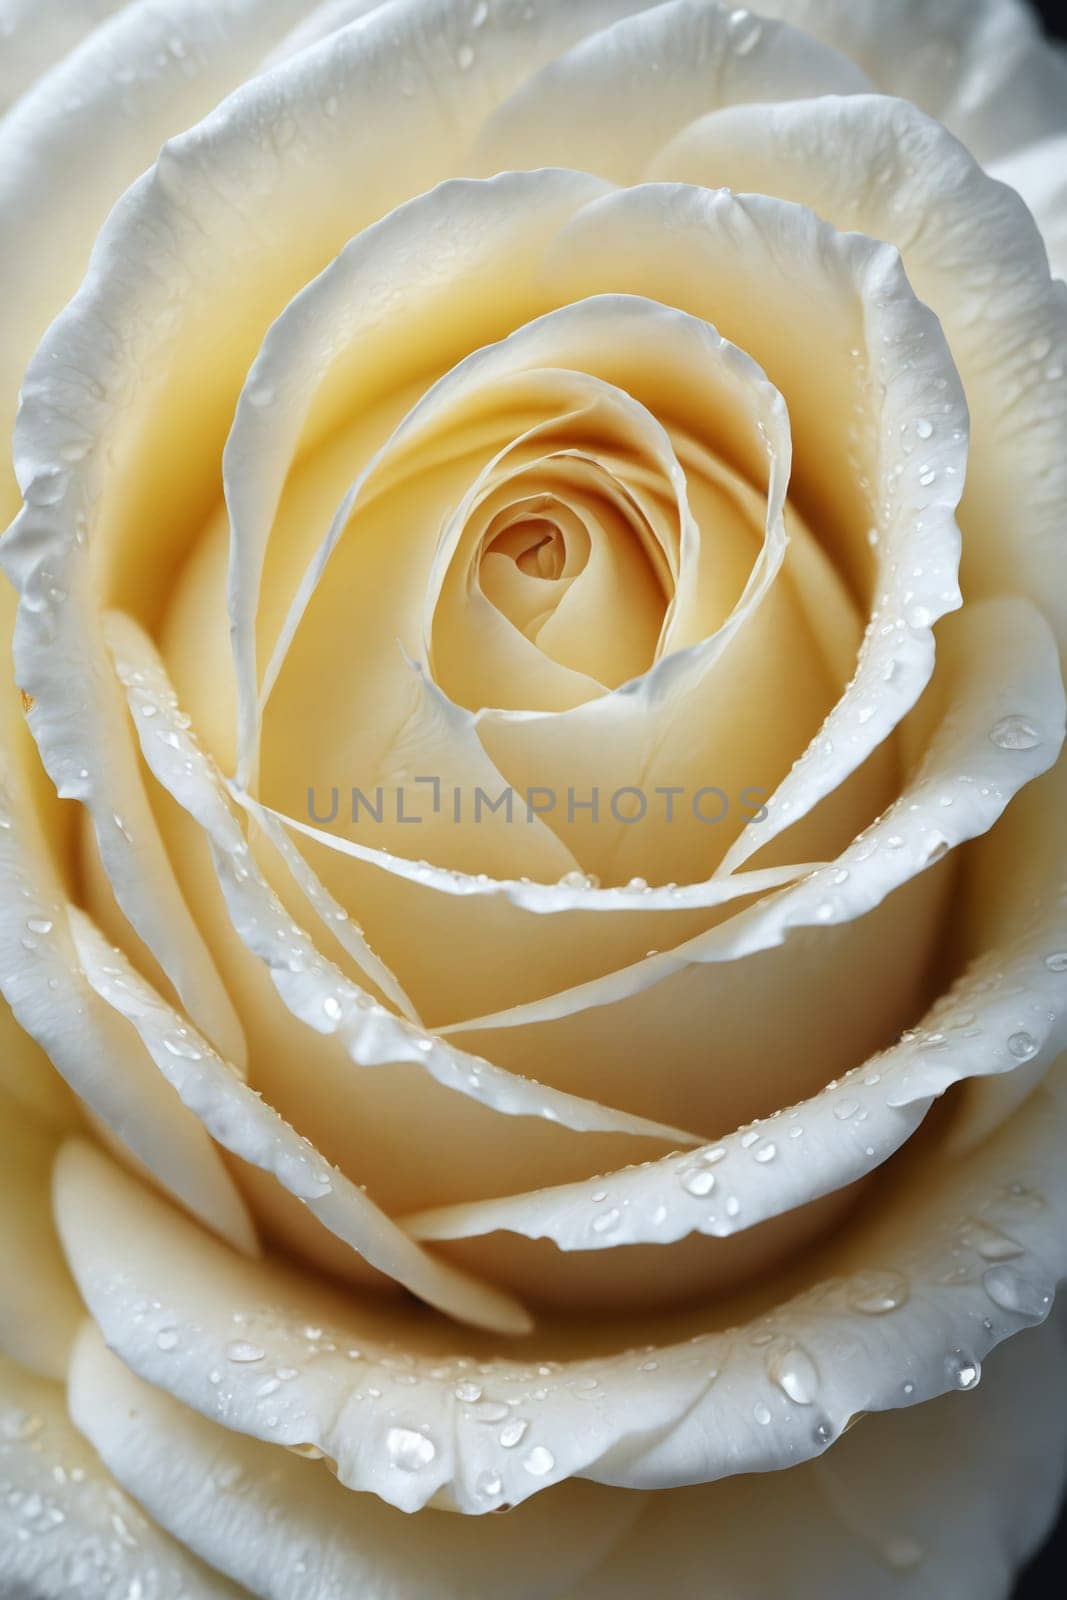 This image encapsulates the serene beauty of a pale rose christened with water droplets, perfect for publications focusing on nature or romantic themes.